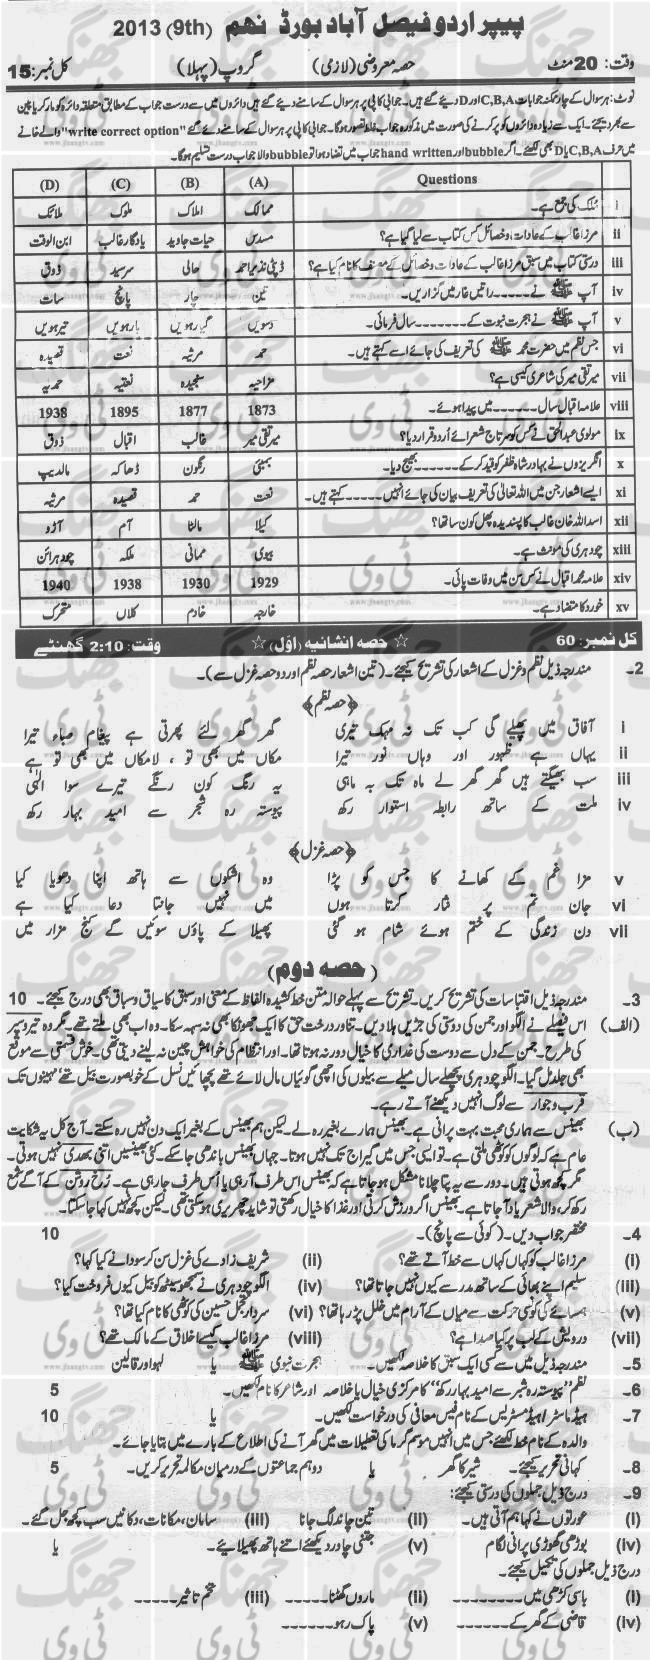 Past-Papers-2013-Faisalabad-Board-9th-Class-Urdu-Group-1 copy